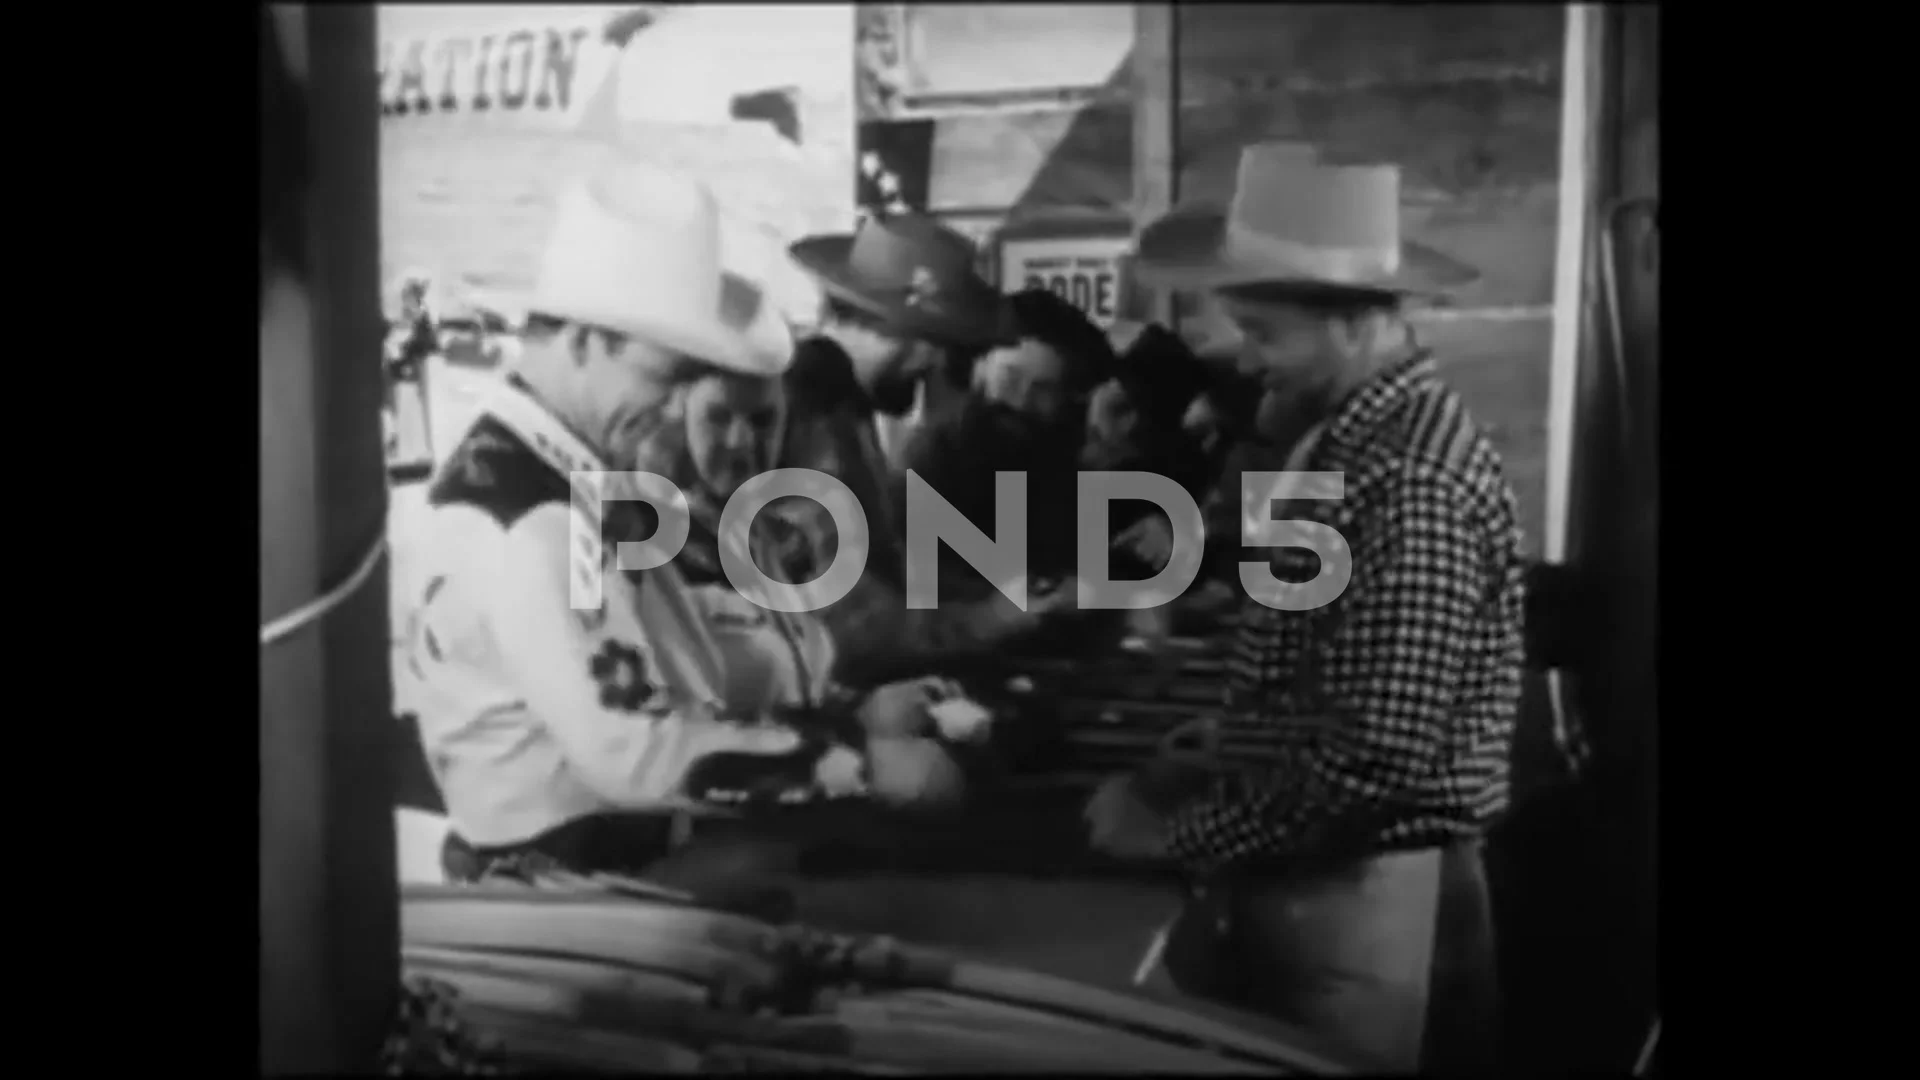 Annie Oakley Stock Footage ~ Royalty Free Stock Videos | Pond5